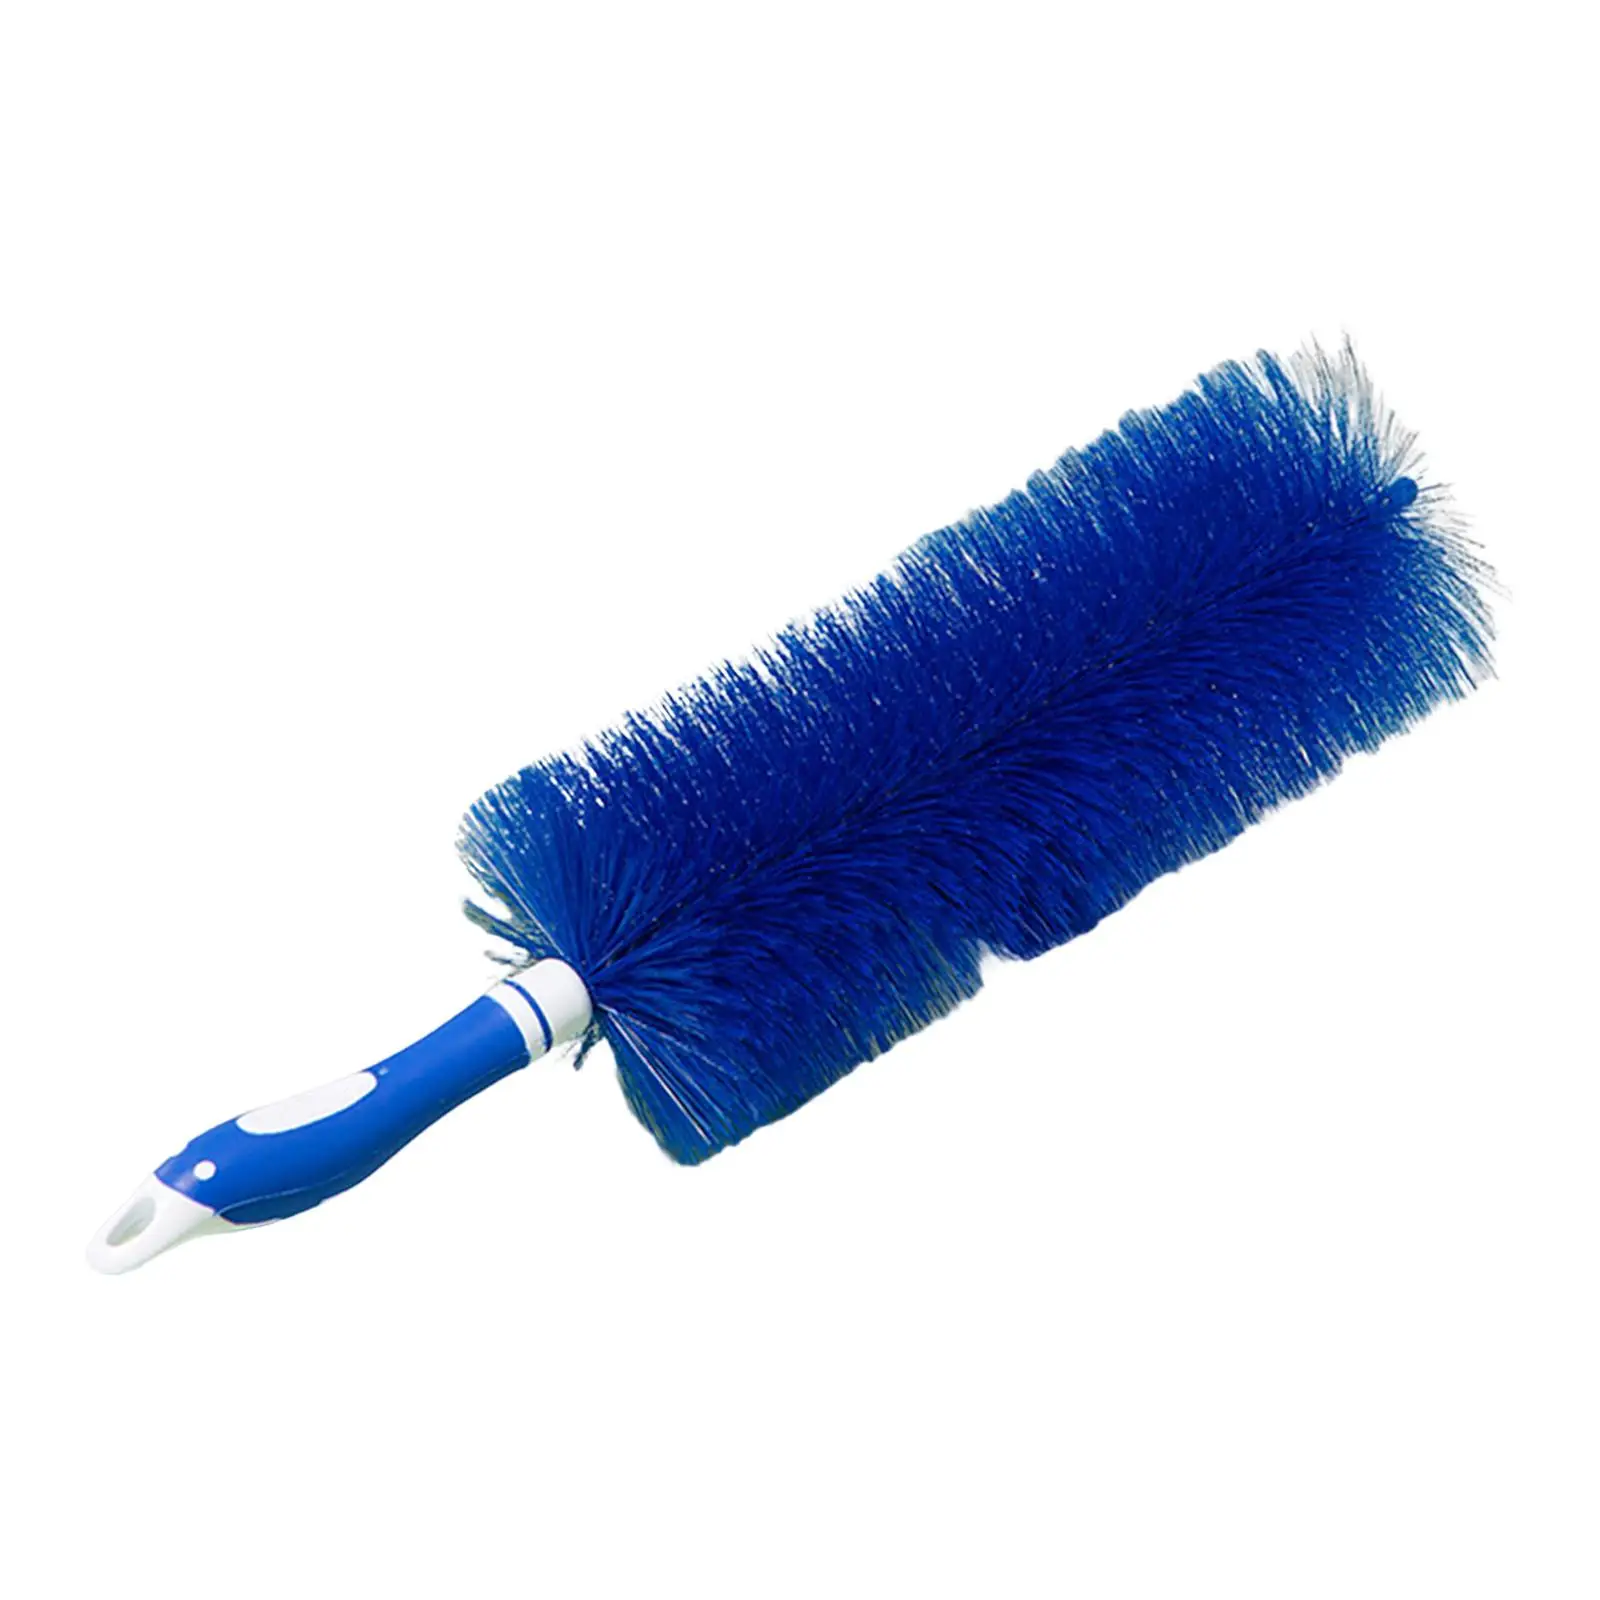 Cleaning Duster Portable Extendable Washable Multipurpose Hand Dust Cleaner Duster Brush for Home Computer Furniture Car Office